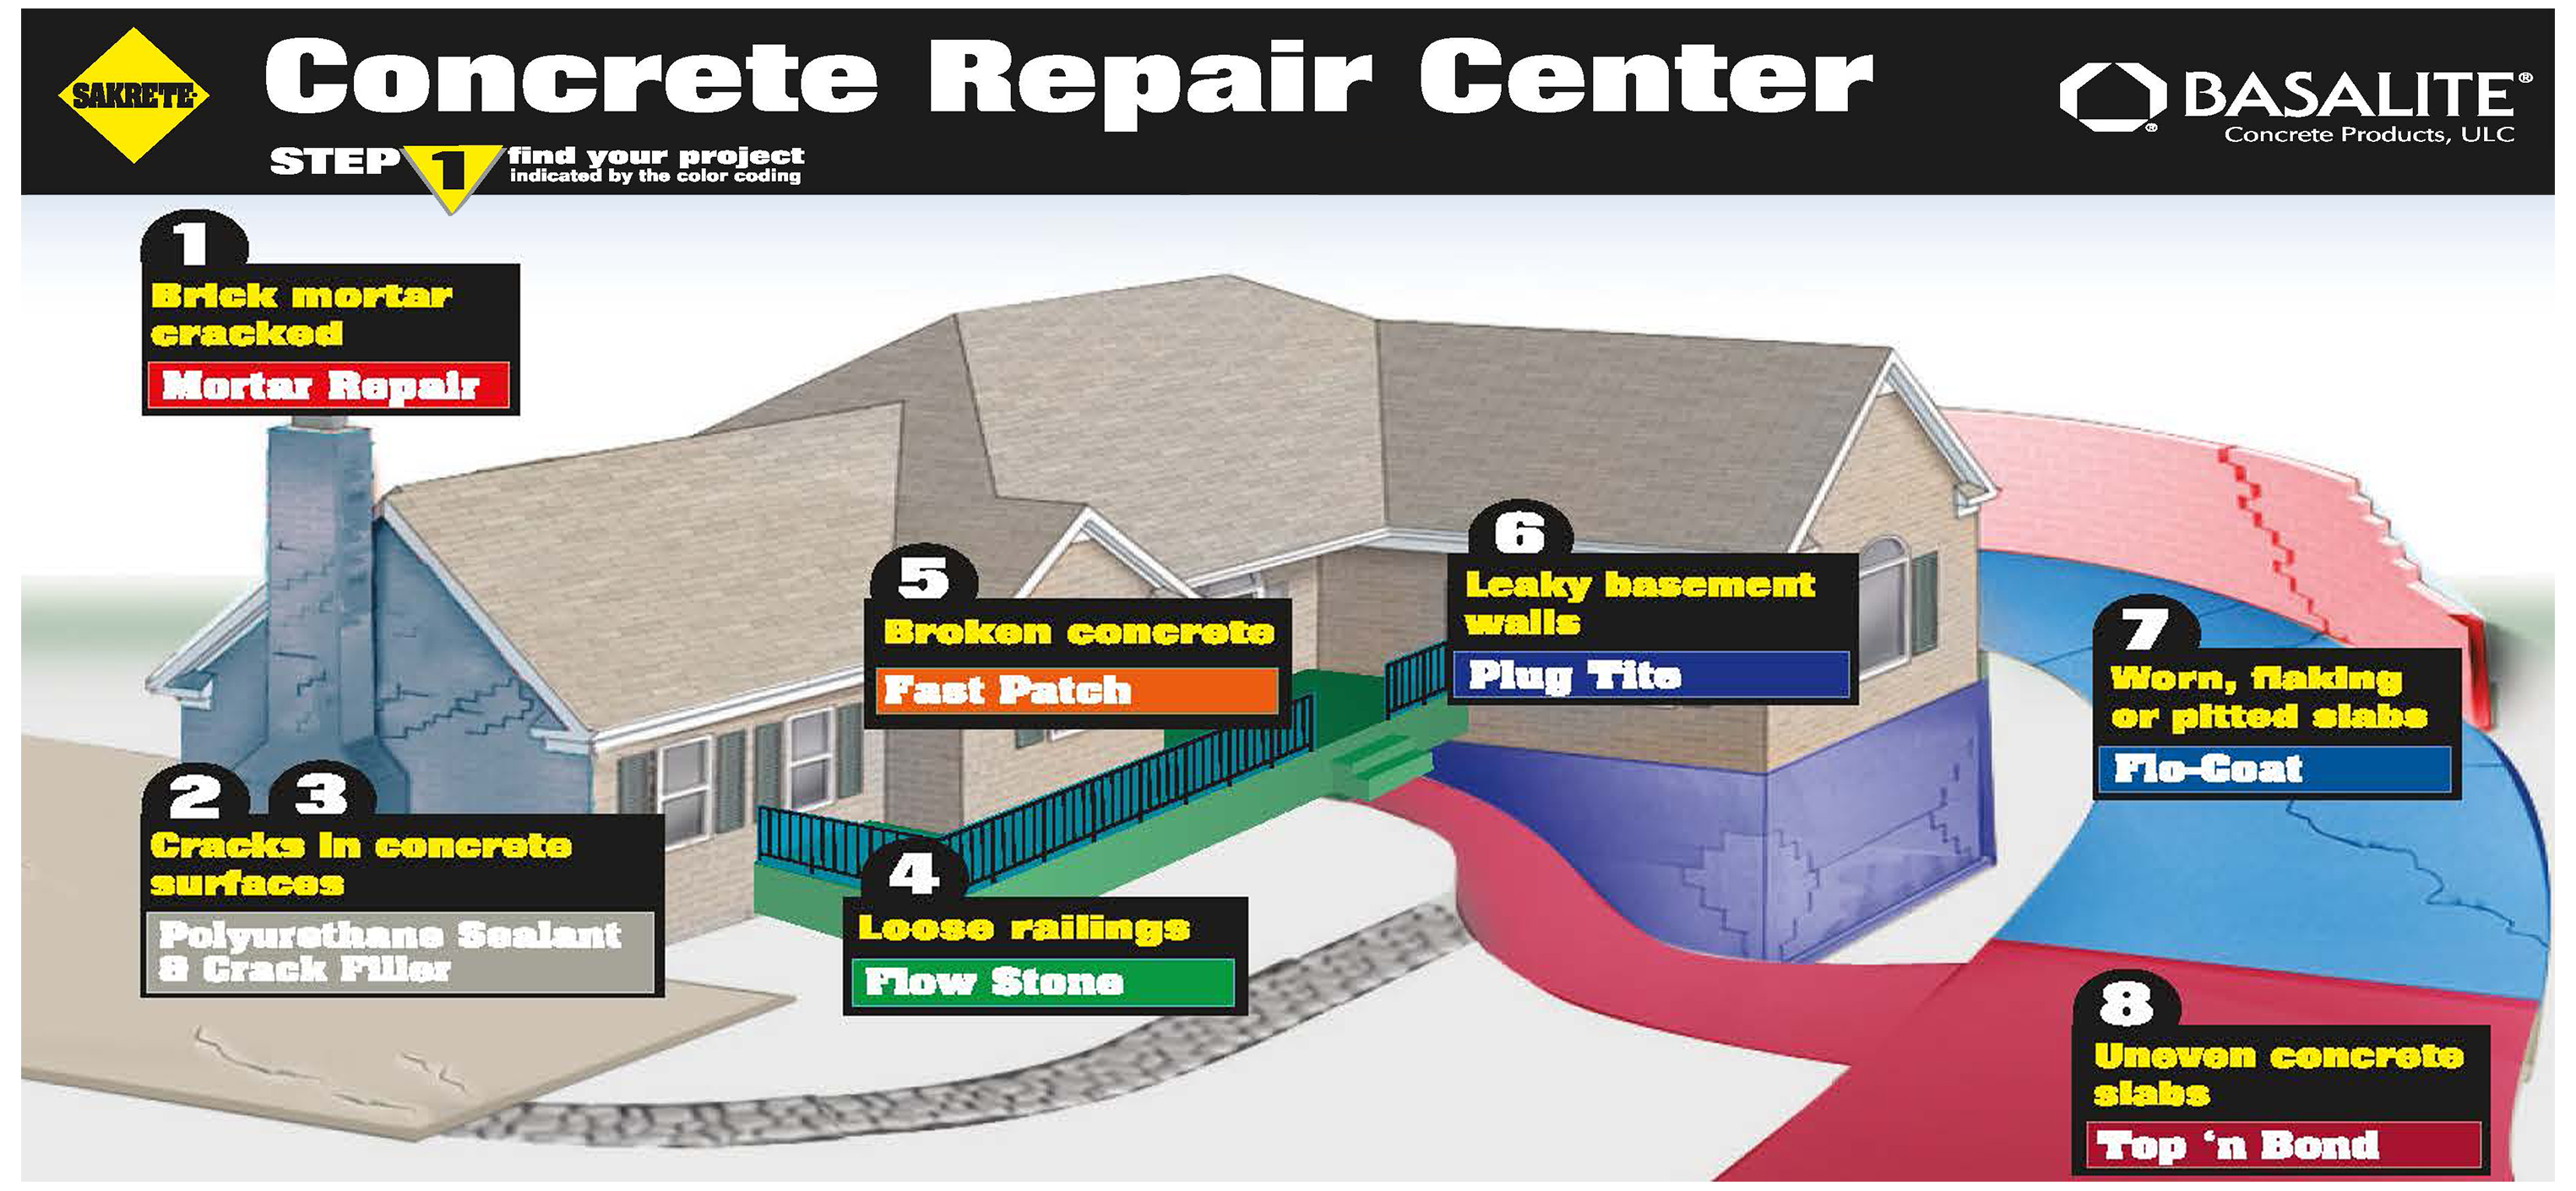 HOW-TO: Concrete Repair in 3 Easy Steps - POCO Building Supplies